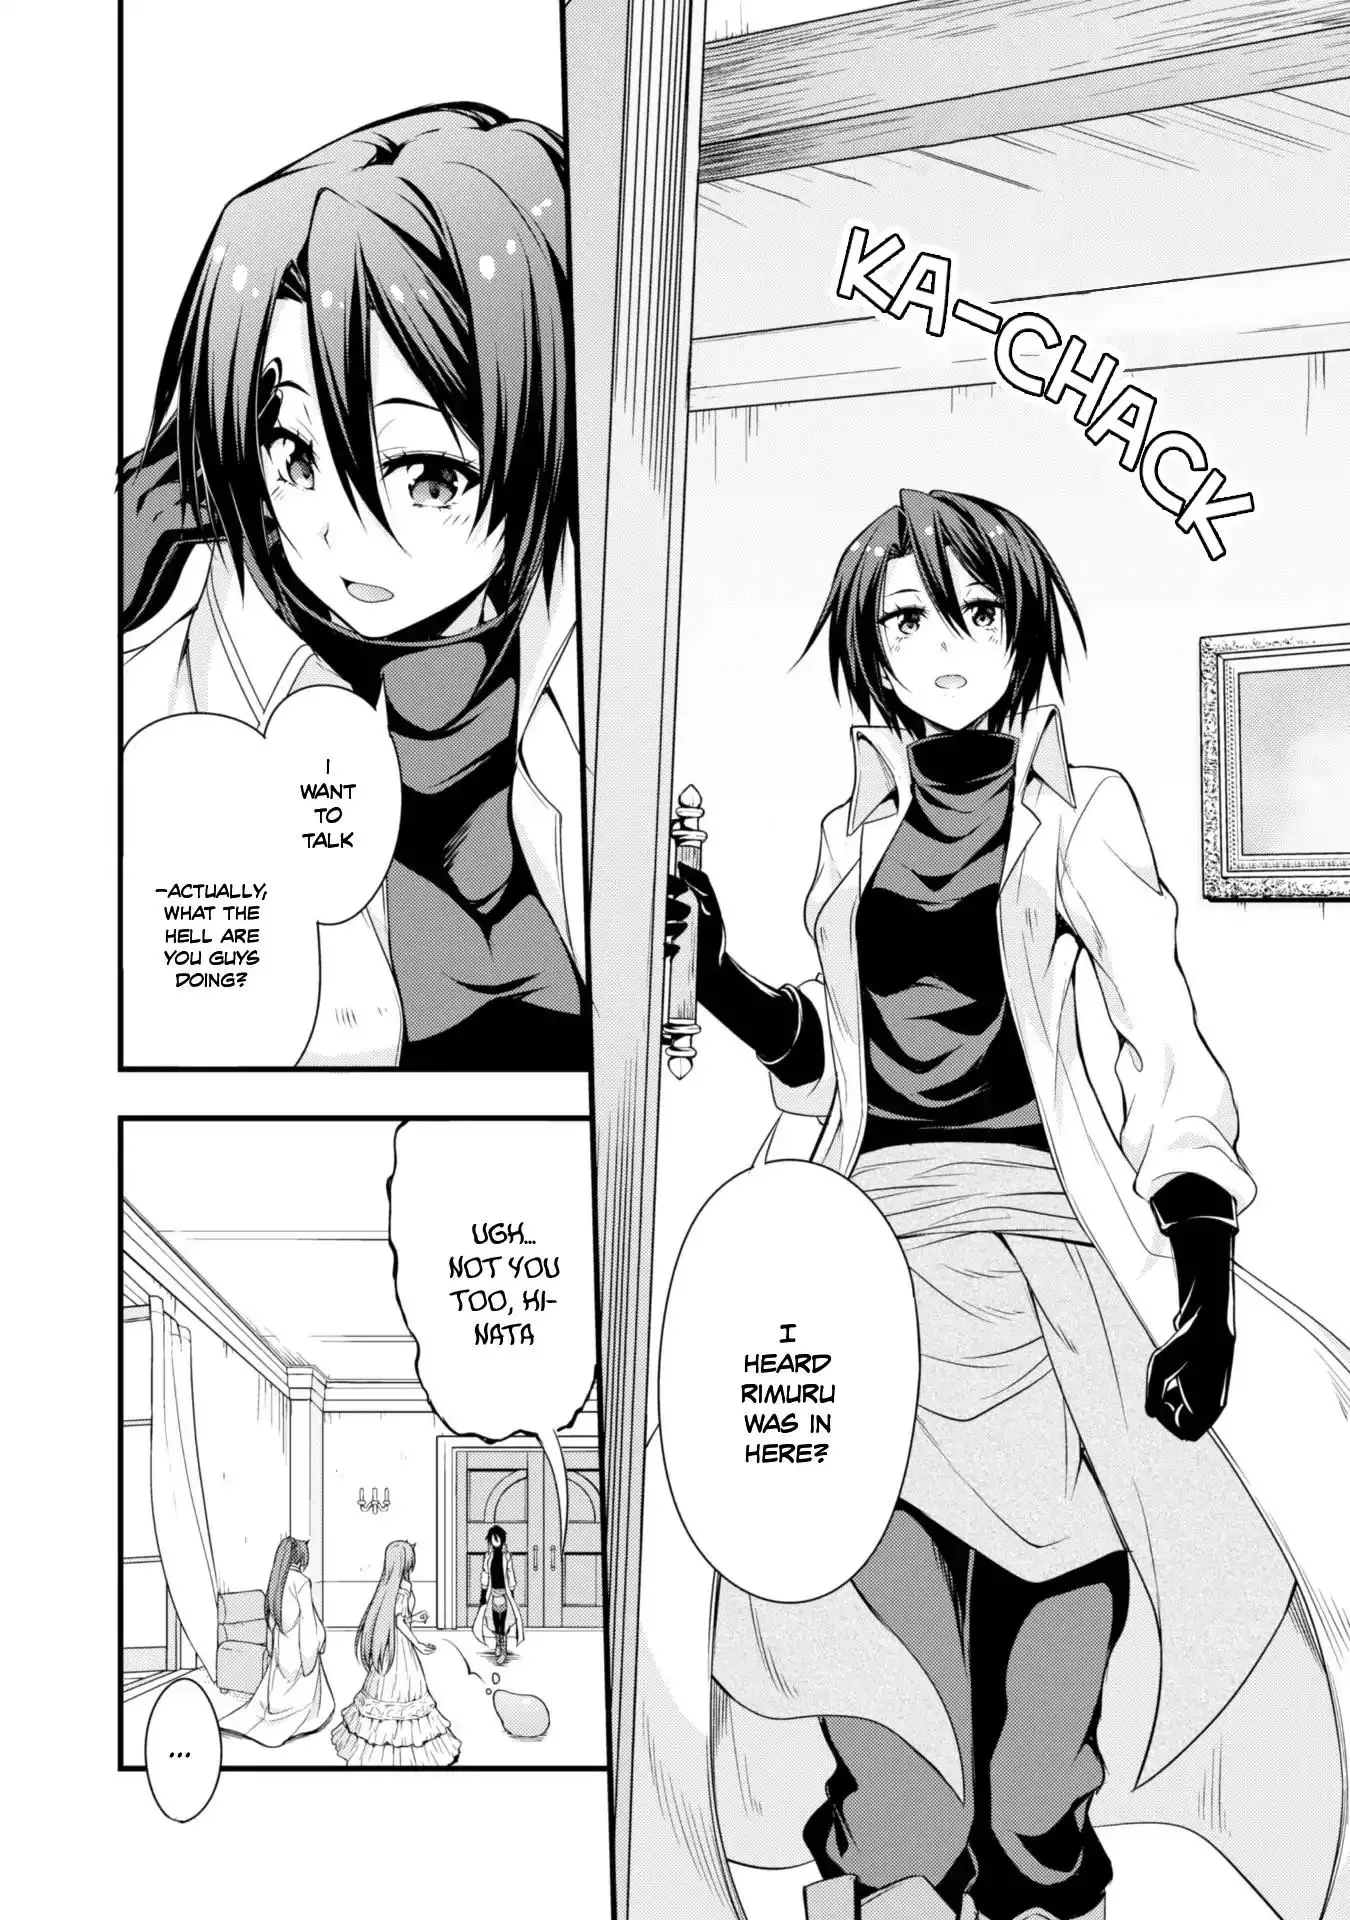 Tensei Shitara Slime Datta Ken: The Ways of Strolling in the Demon Country - 13 page 9